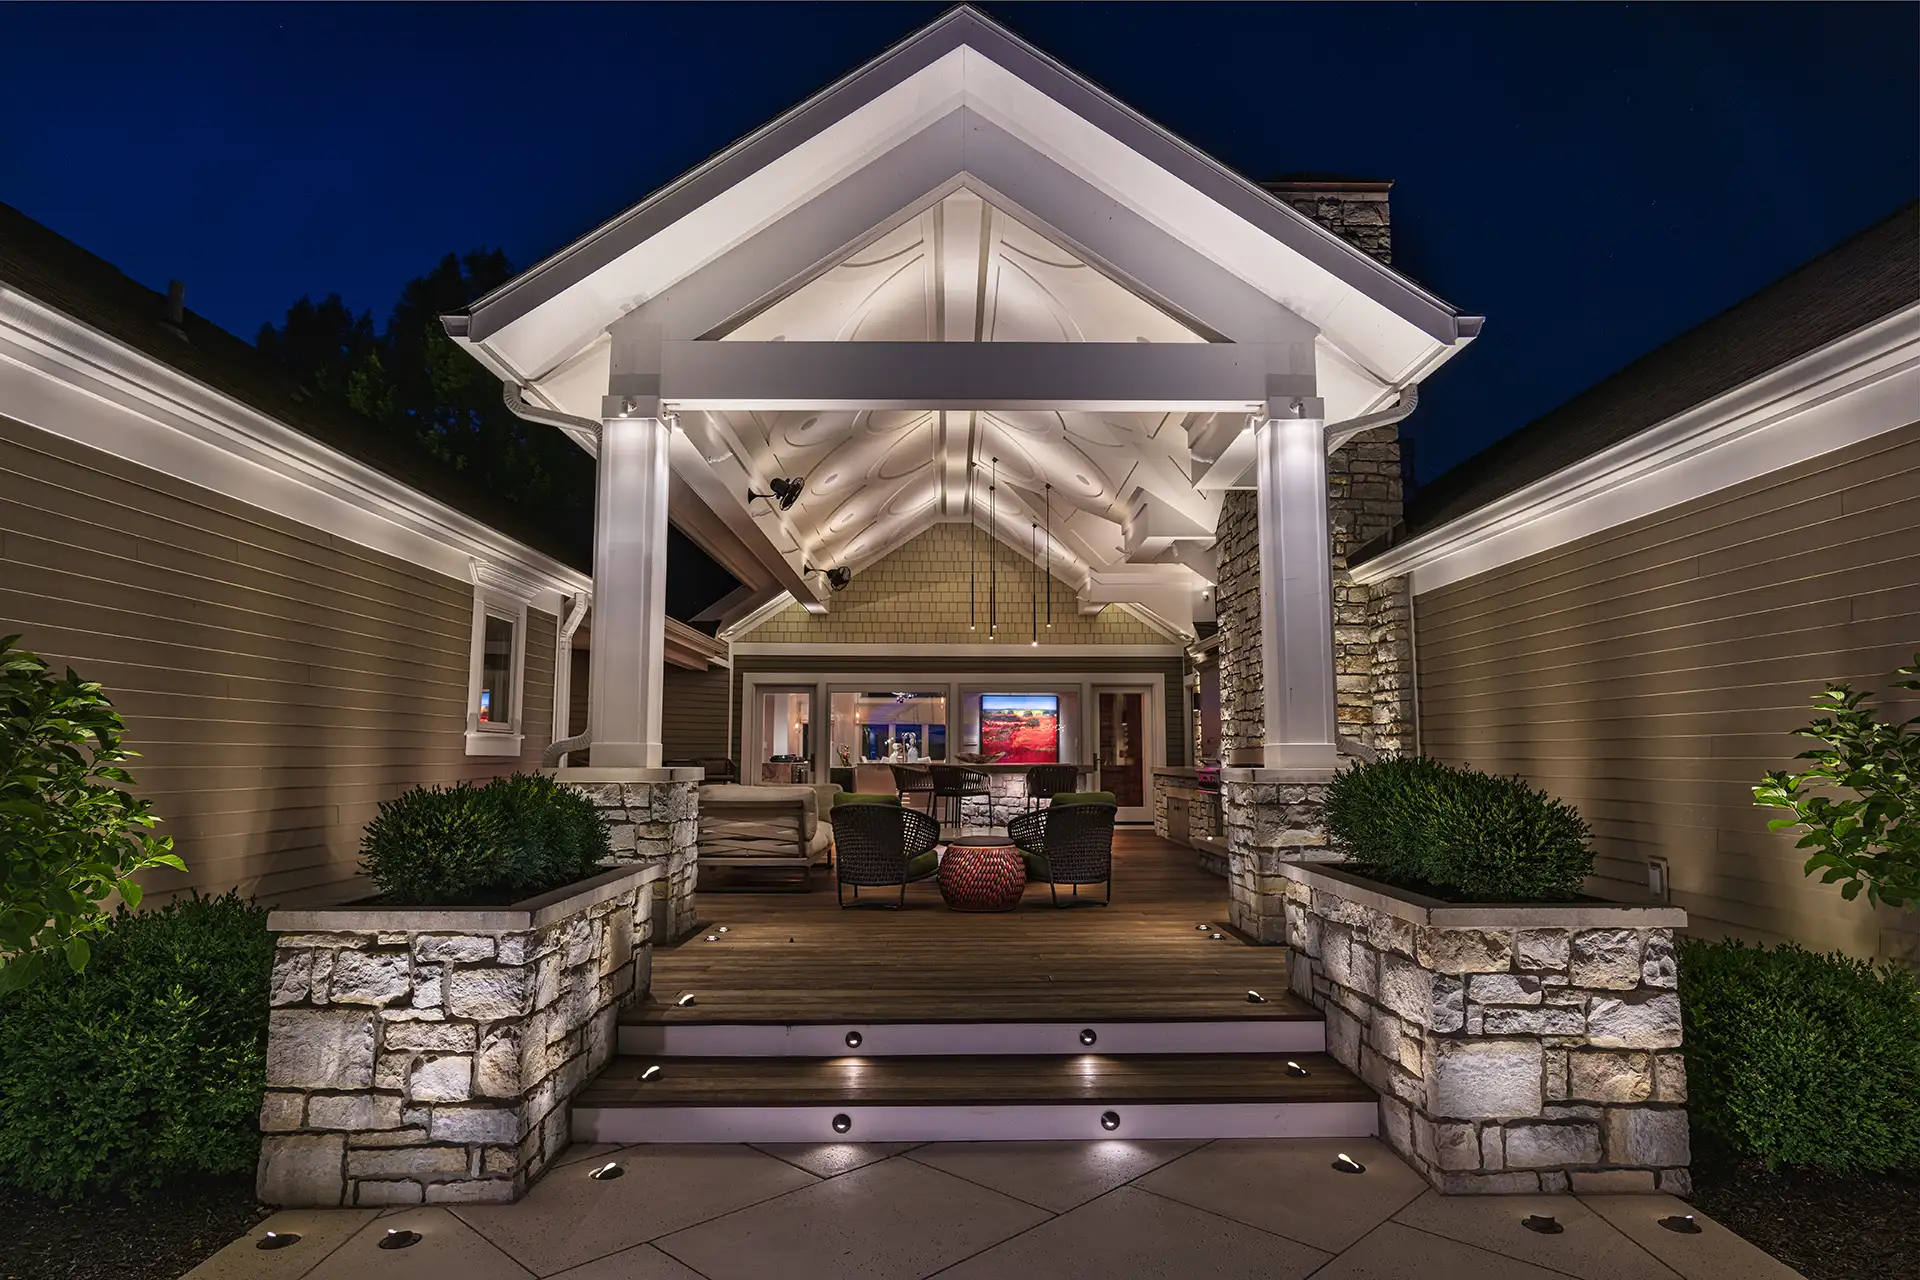 Victory Lane image 19 second porch outdoor living area Lighthouse Outdoor Lighting and Audio OH Columbus Cincinnati Dayton